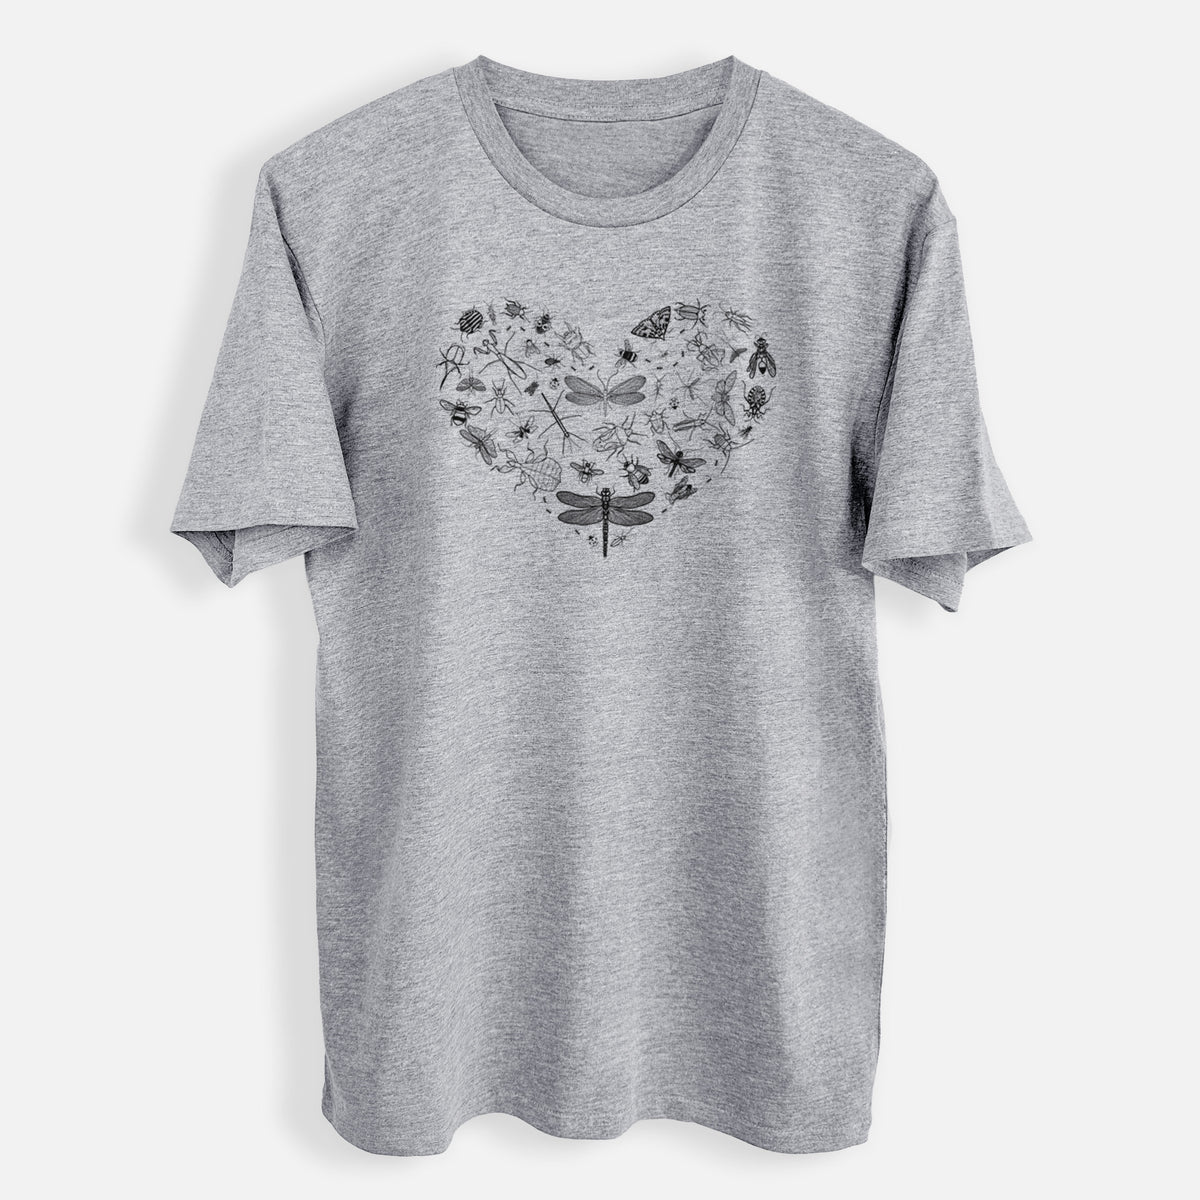 Heart Full of Insects - Mens Everyday Staple Tee